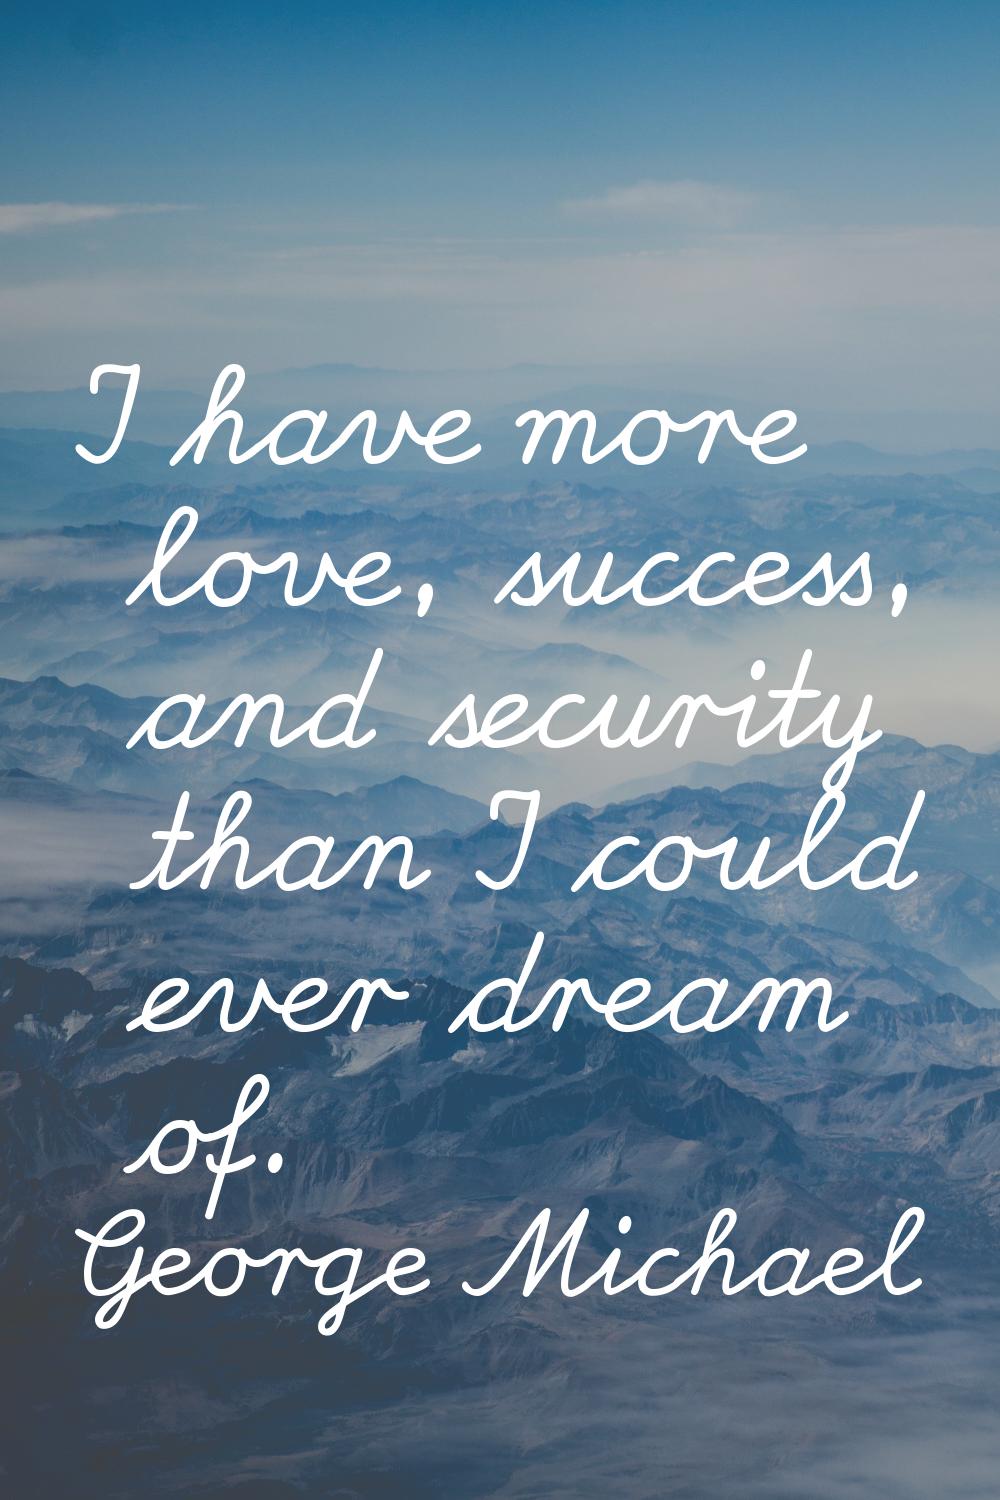 I have more love, success, and security than I could ever dream of.